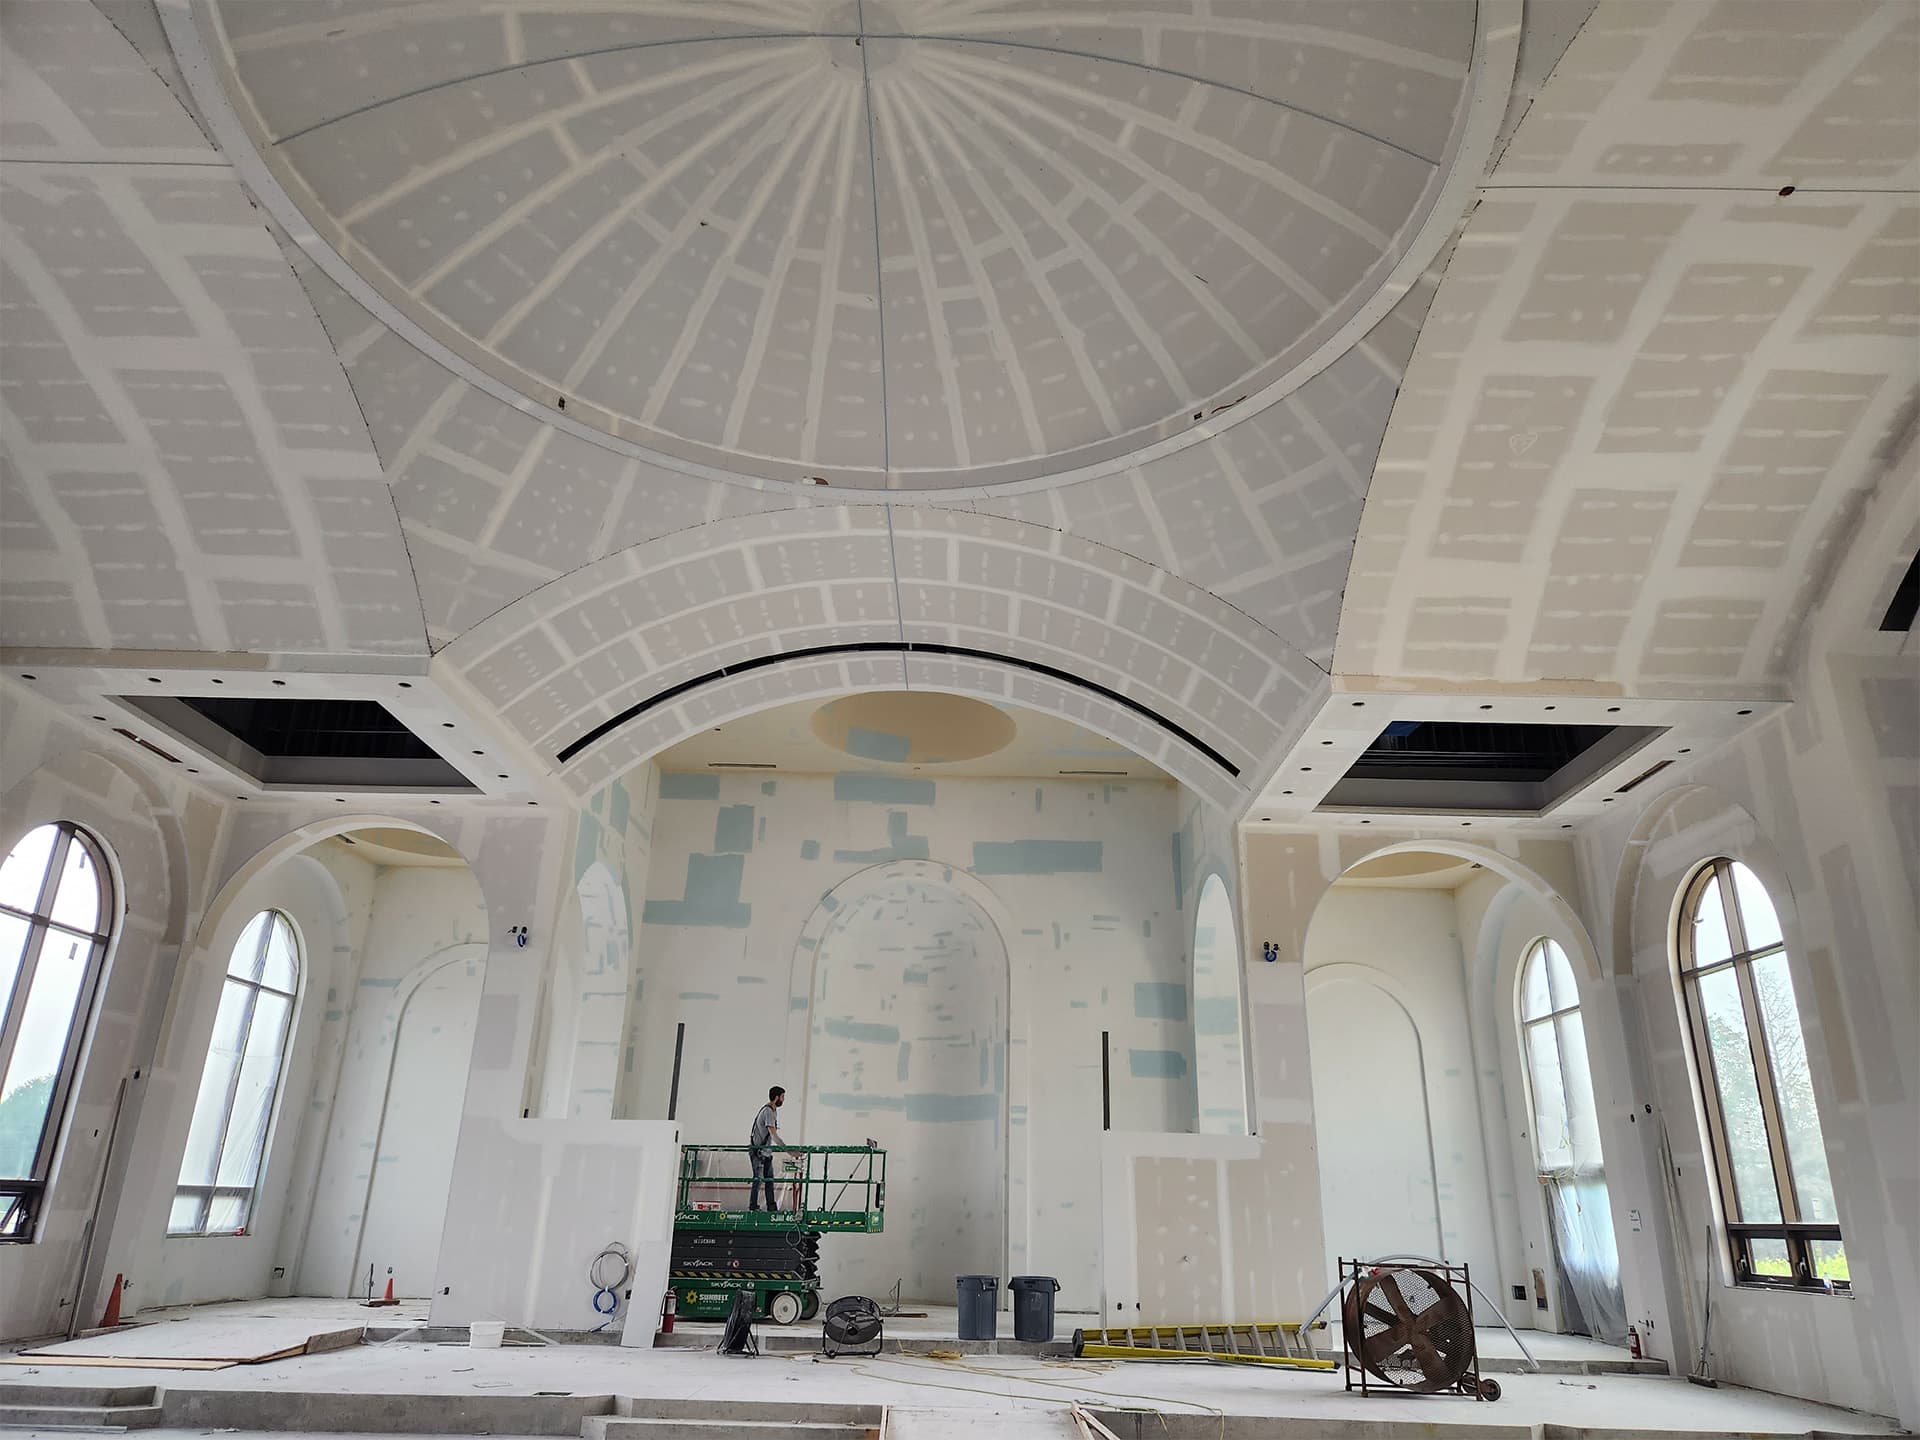 Church interior under renovation with a worker on a lift, featuring a domed ceiling and large arched windows